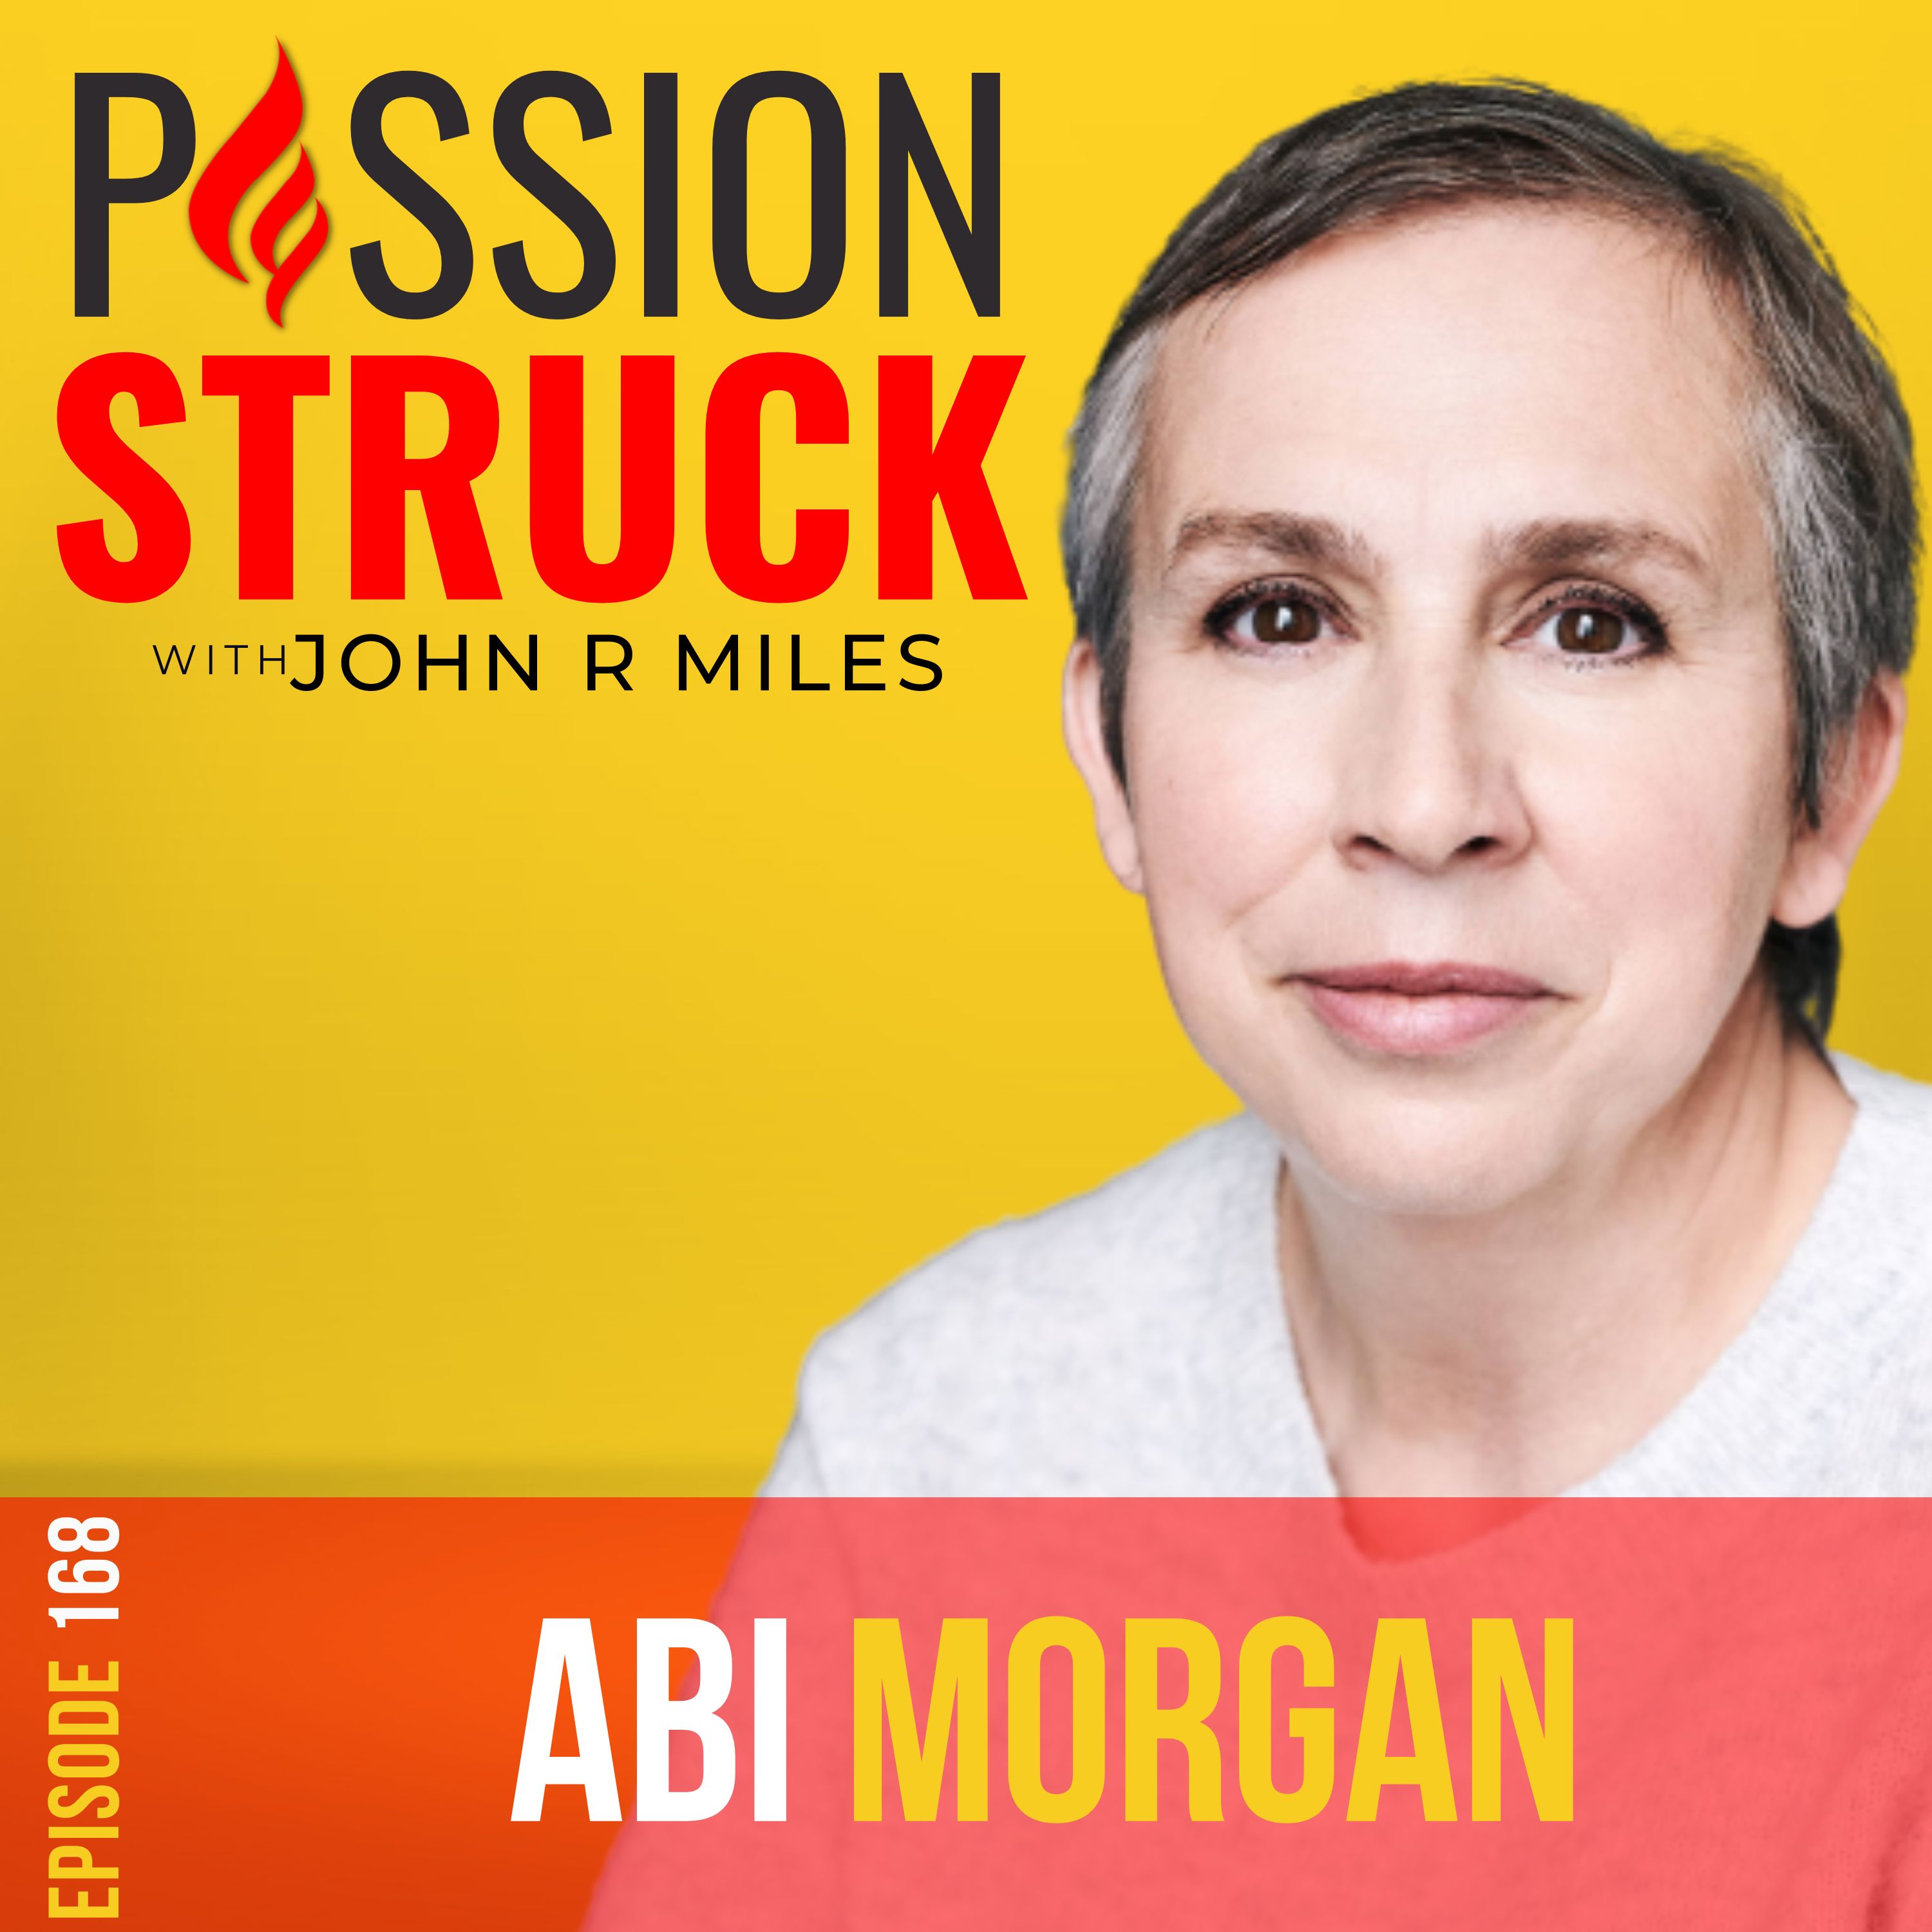 Passion Struck with John R. Miles album cover episode 168 with Abi Morgan